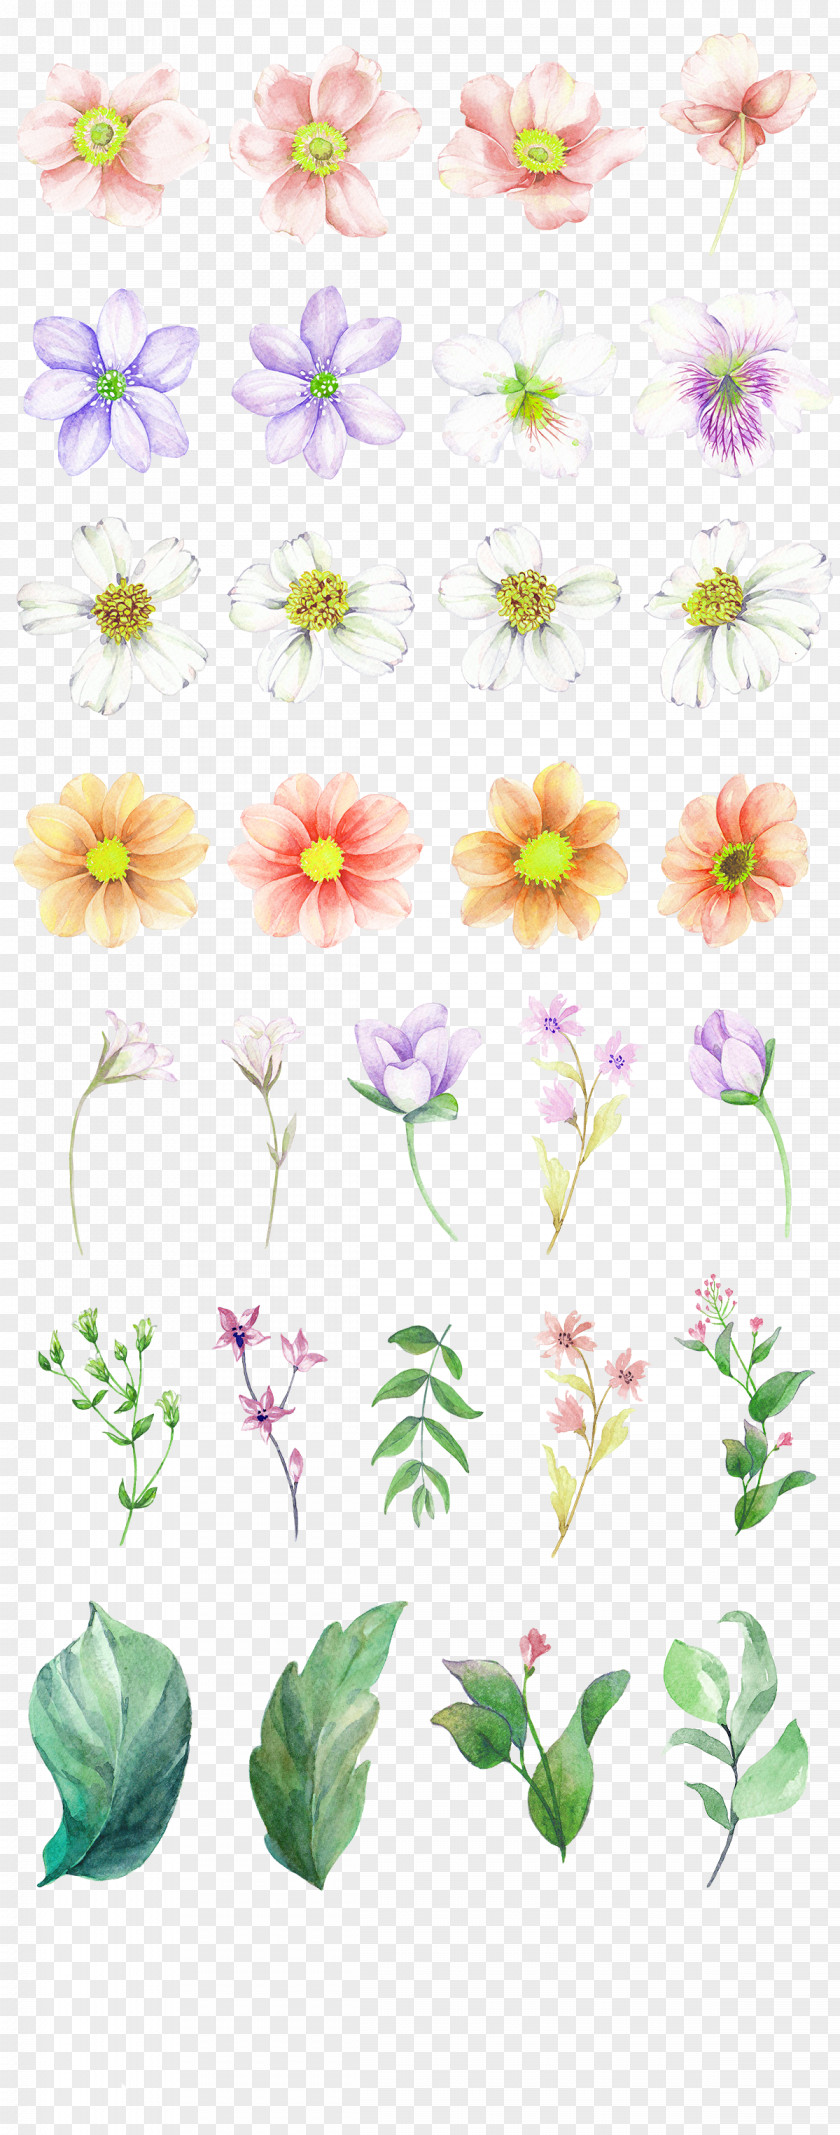 White Dream Garden Flowers Decorative Patterns Watercolor Painting Drawing Download PNG